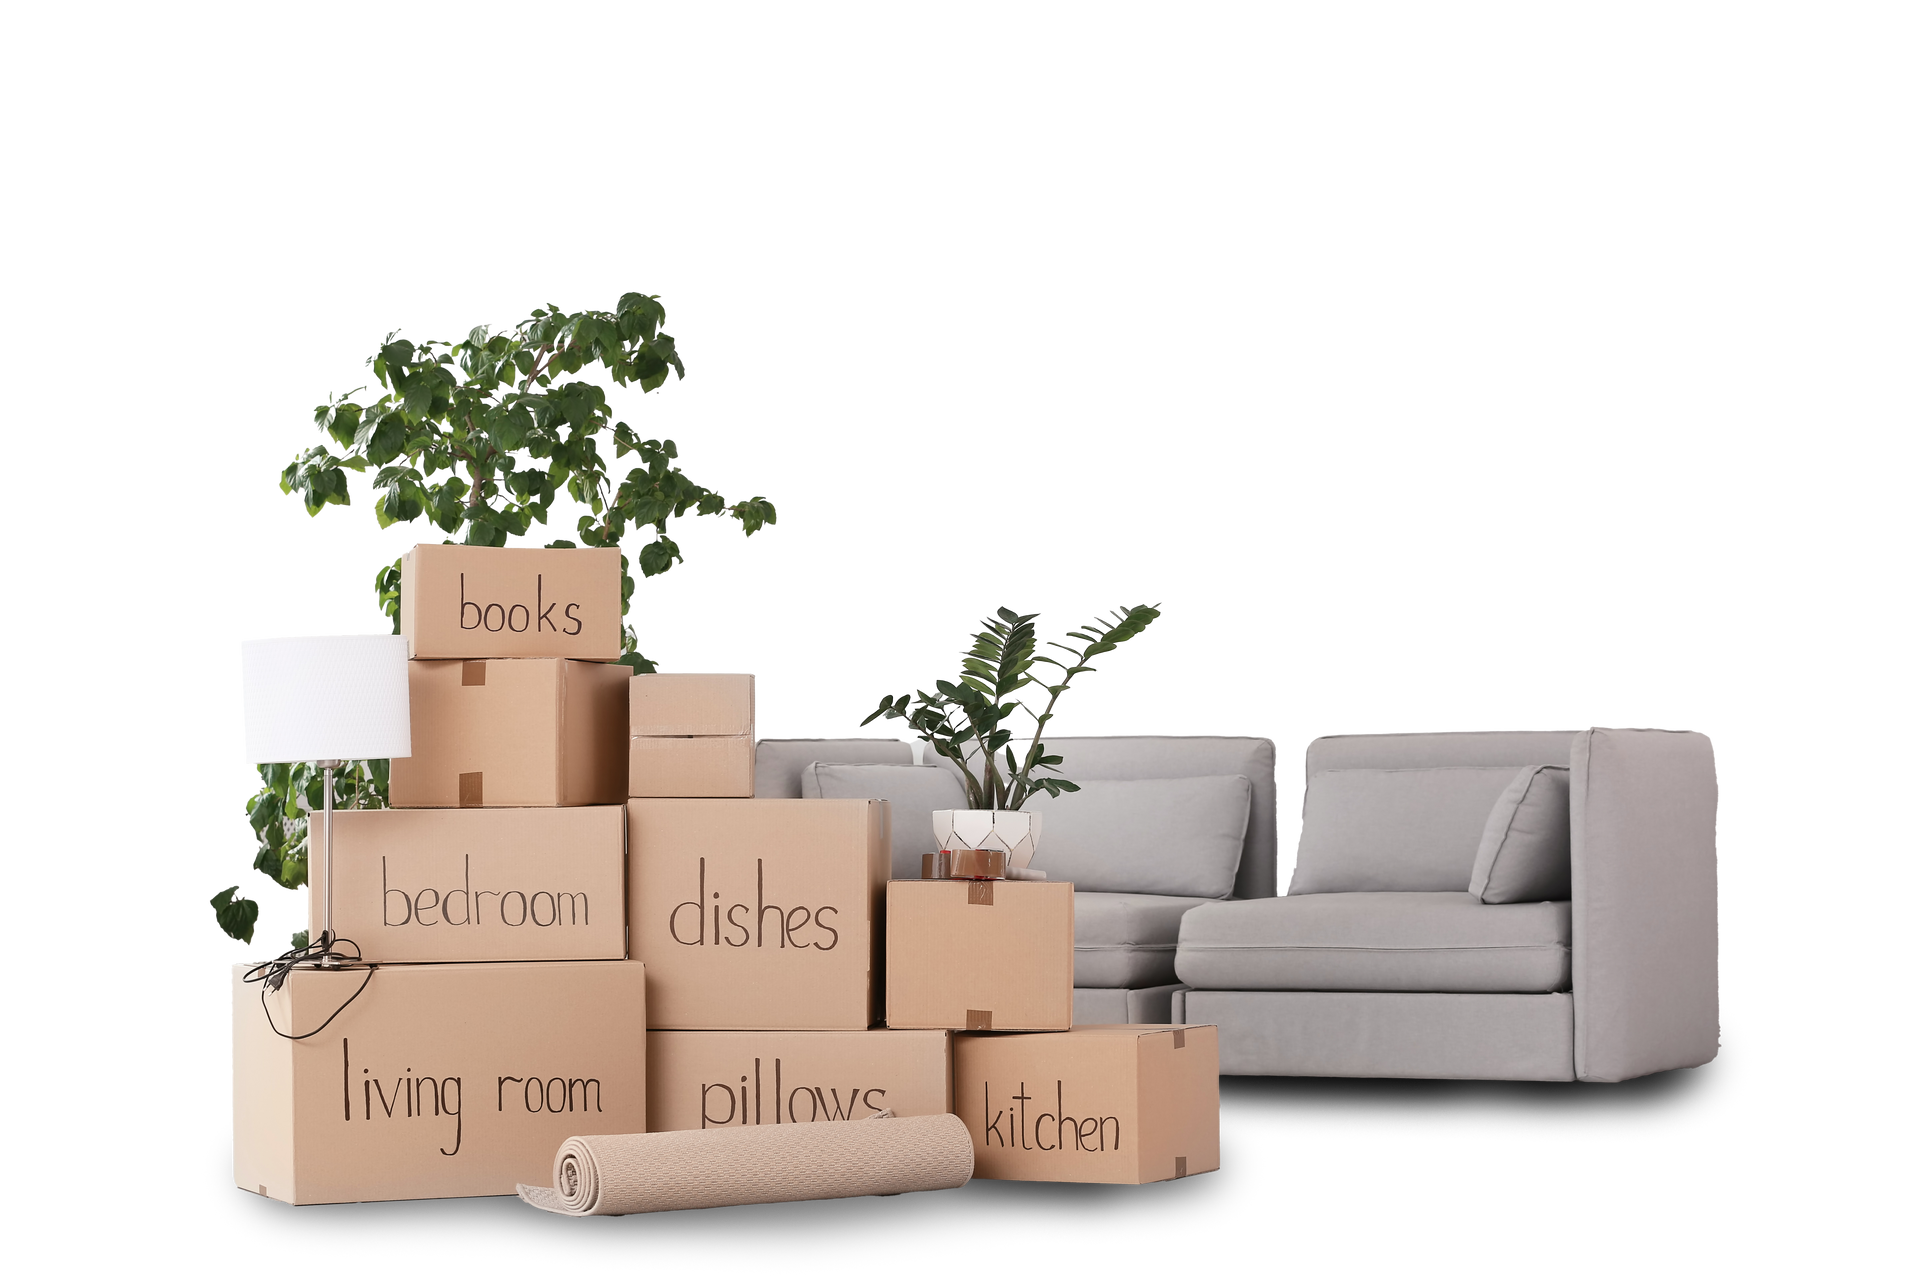 a stack of cardboard boxes labeled bedroom dishes living room pillows and kitchen